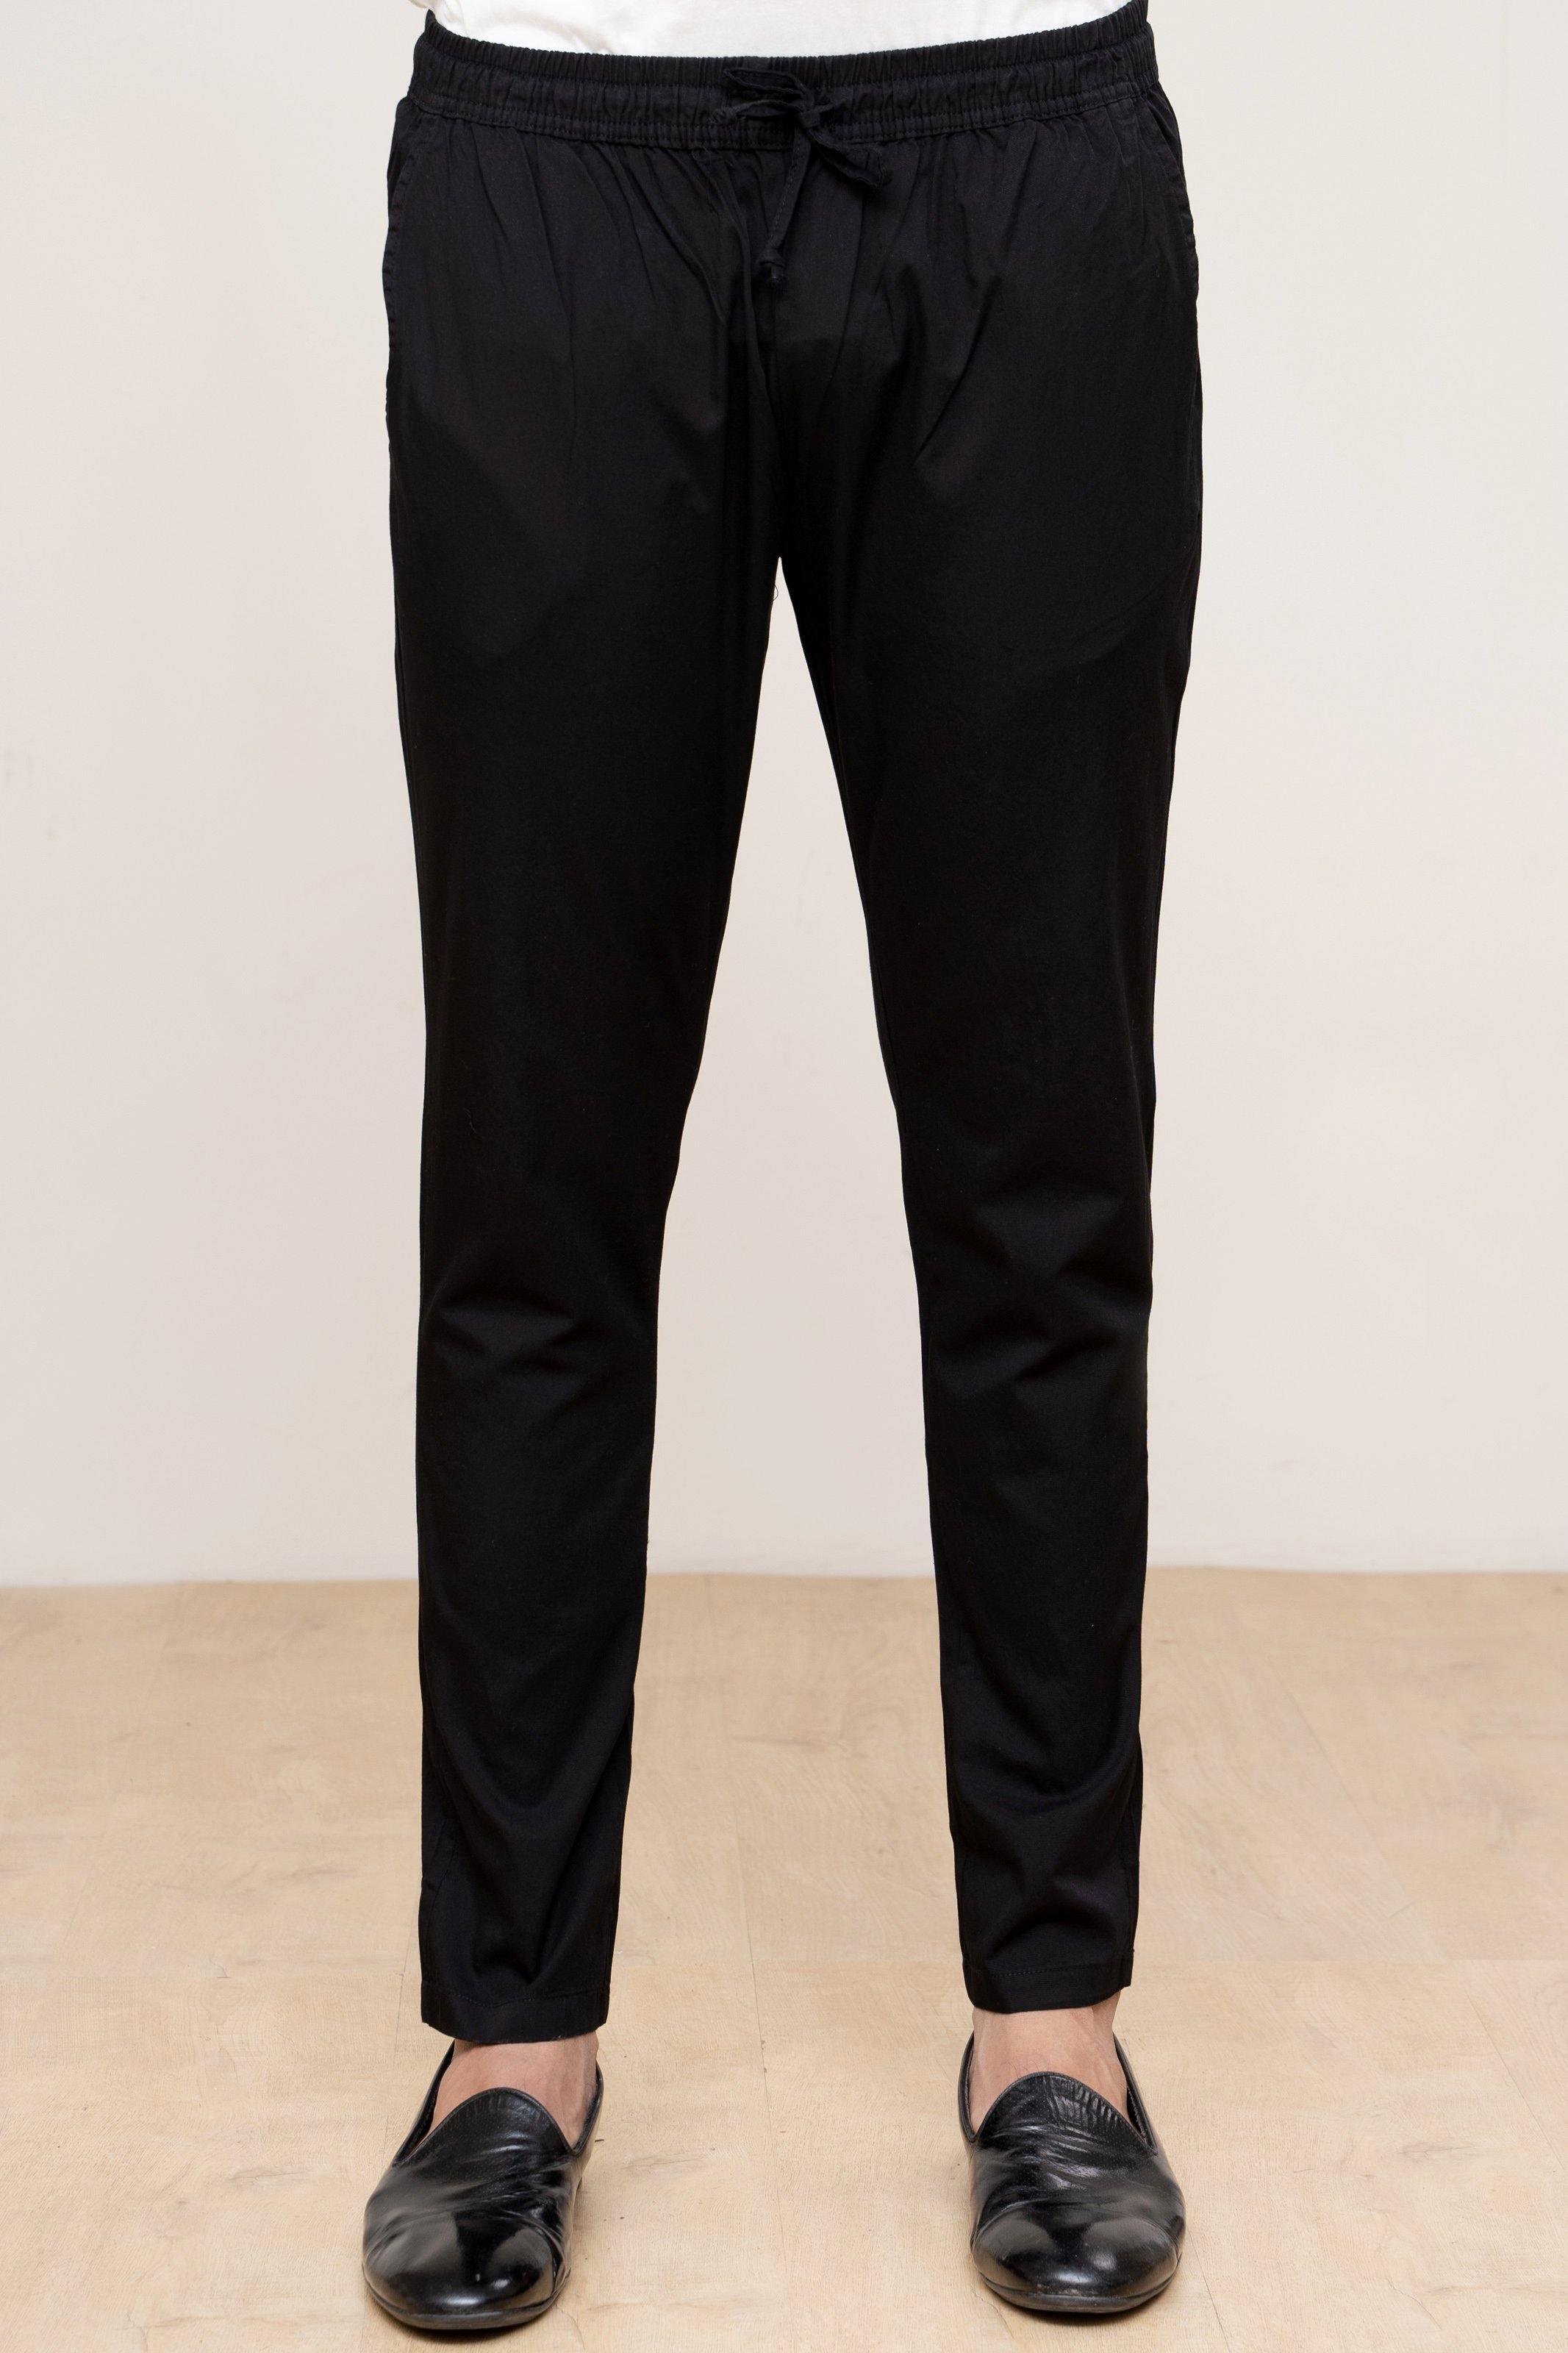 TROUSER BLACK at Charcoal Clothing